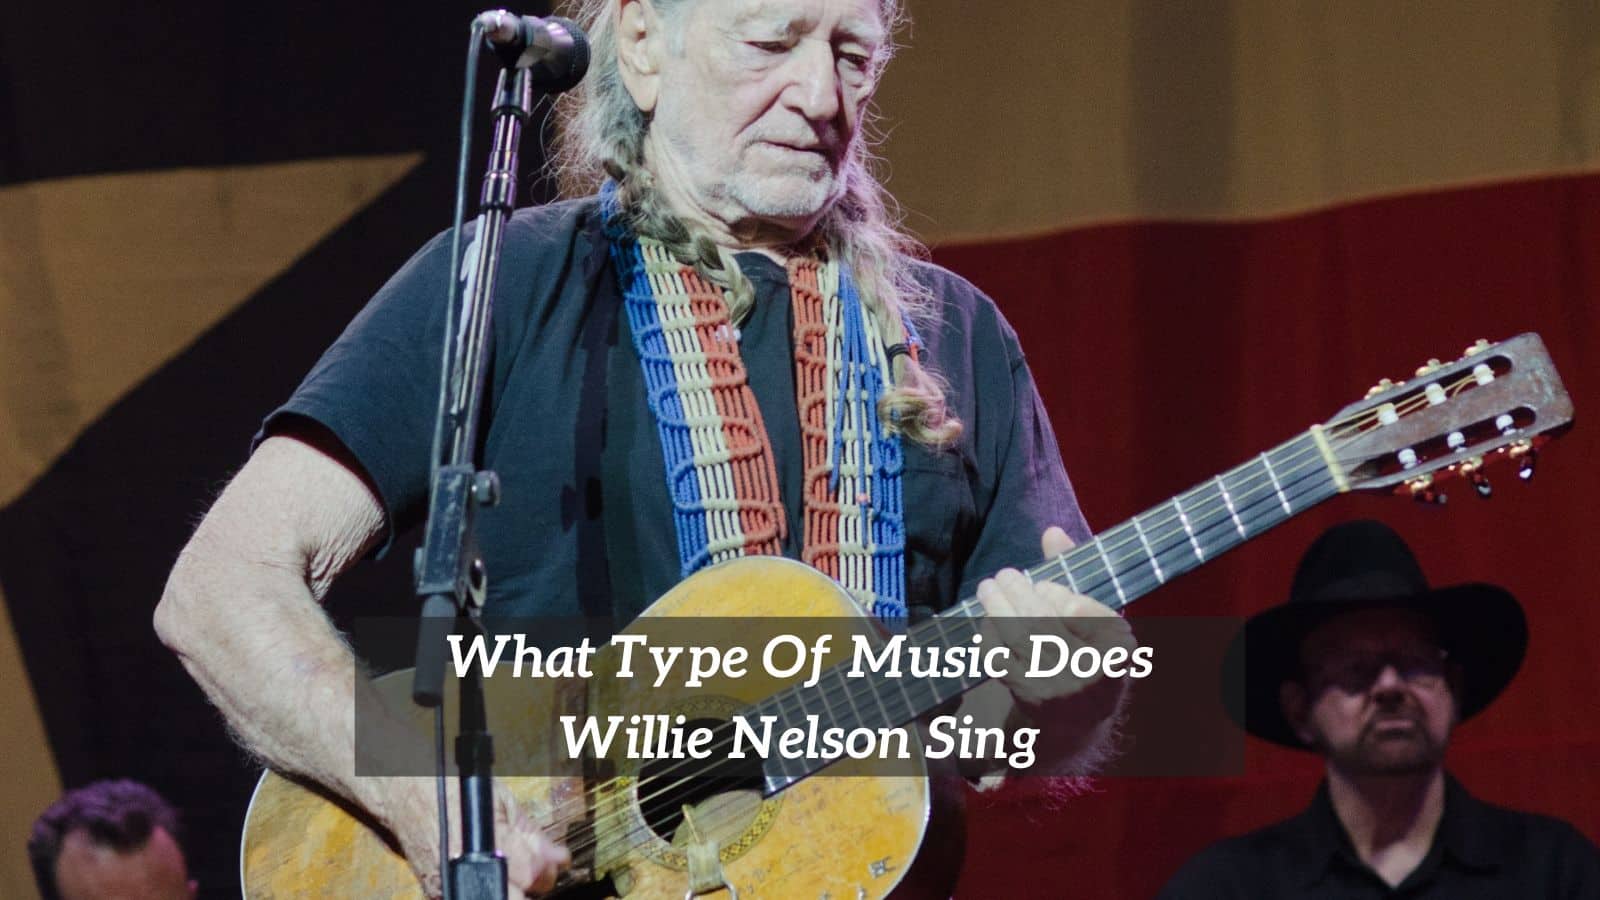 What Type Of Music Does Willie Nelson Sing